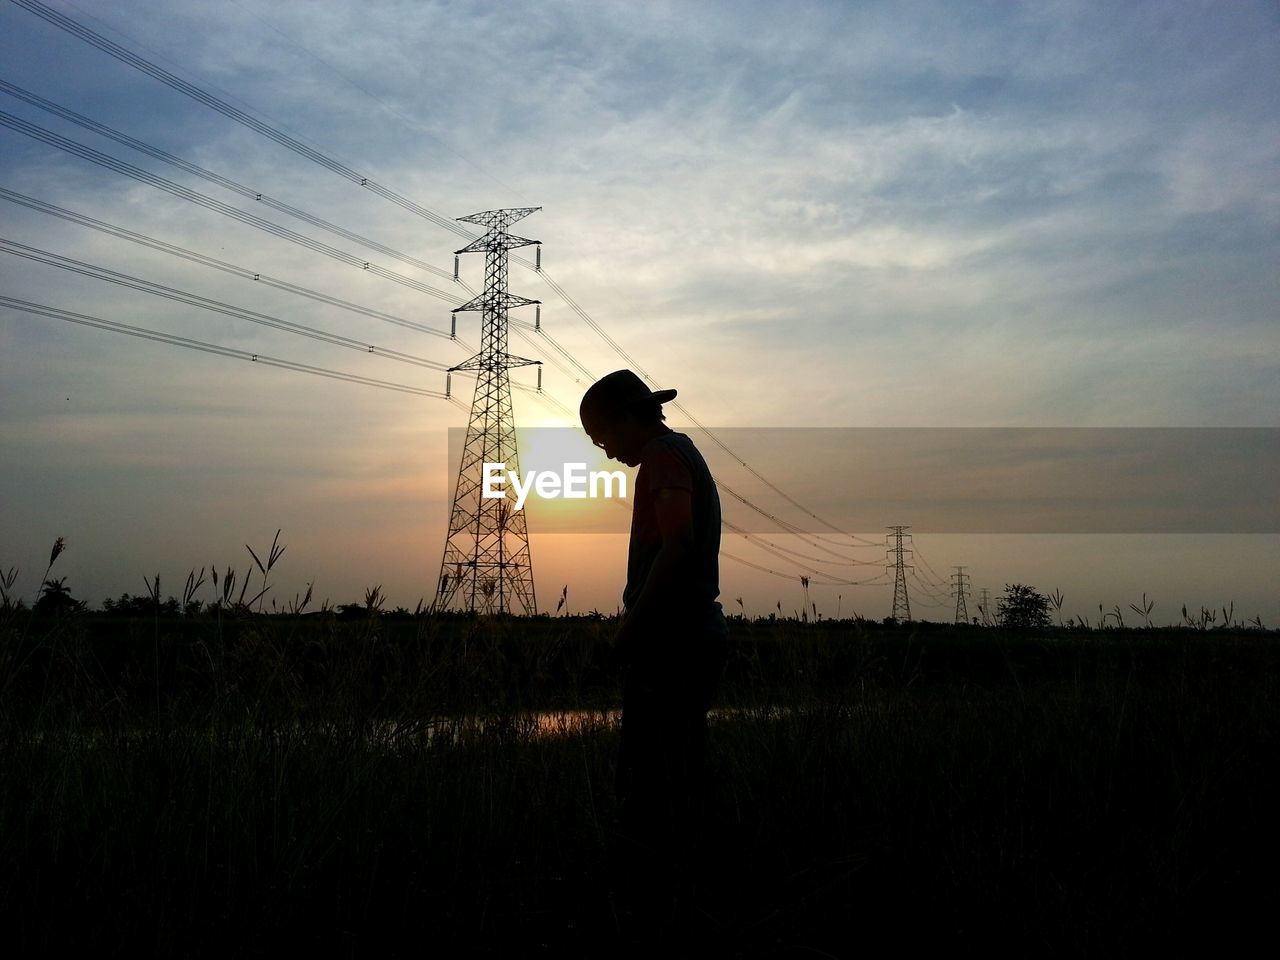 Silhouette man standing on field against electricity pylon in background against sky during sunset